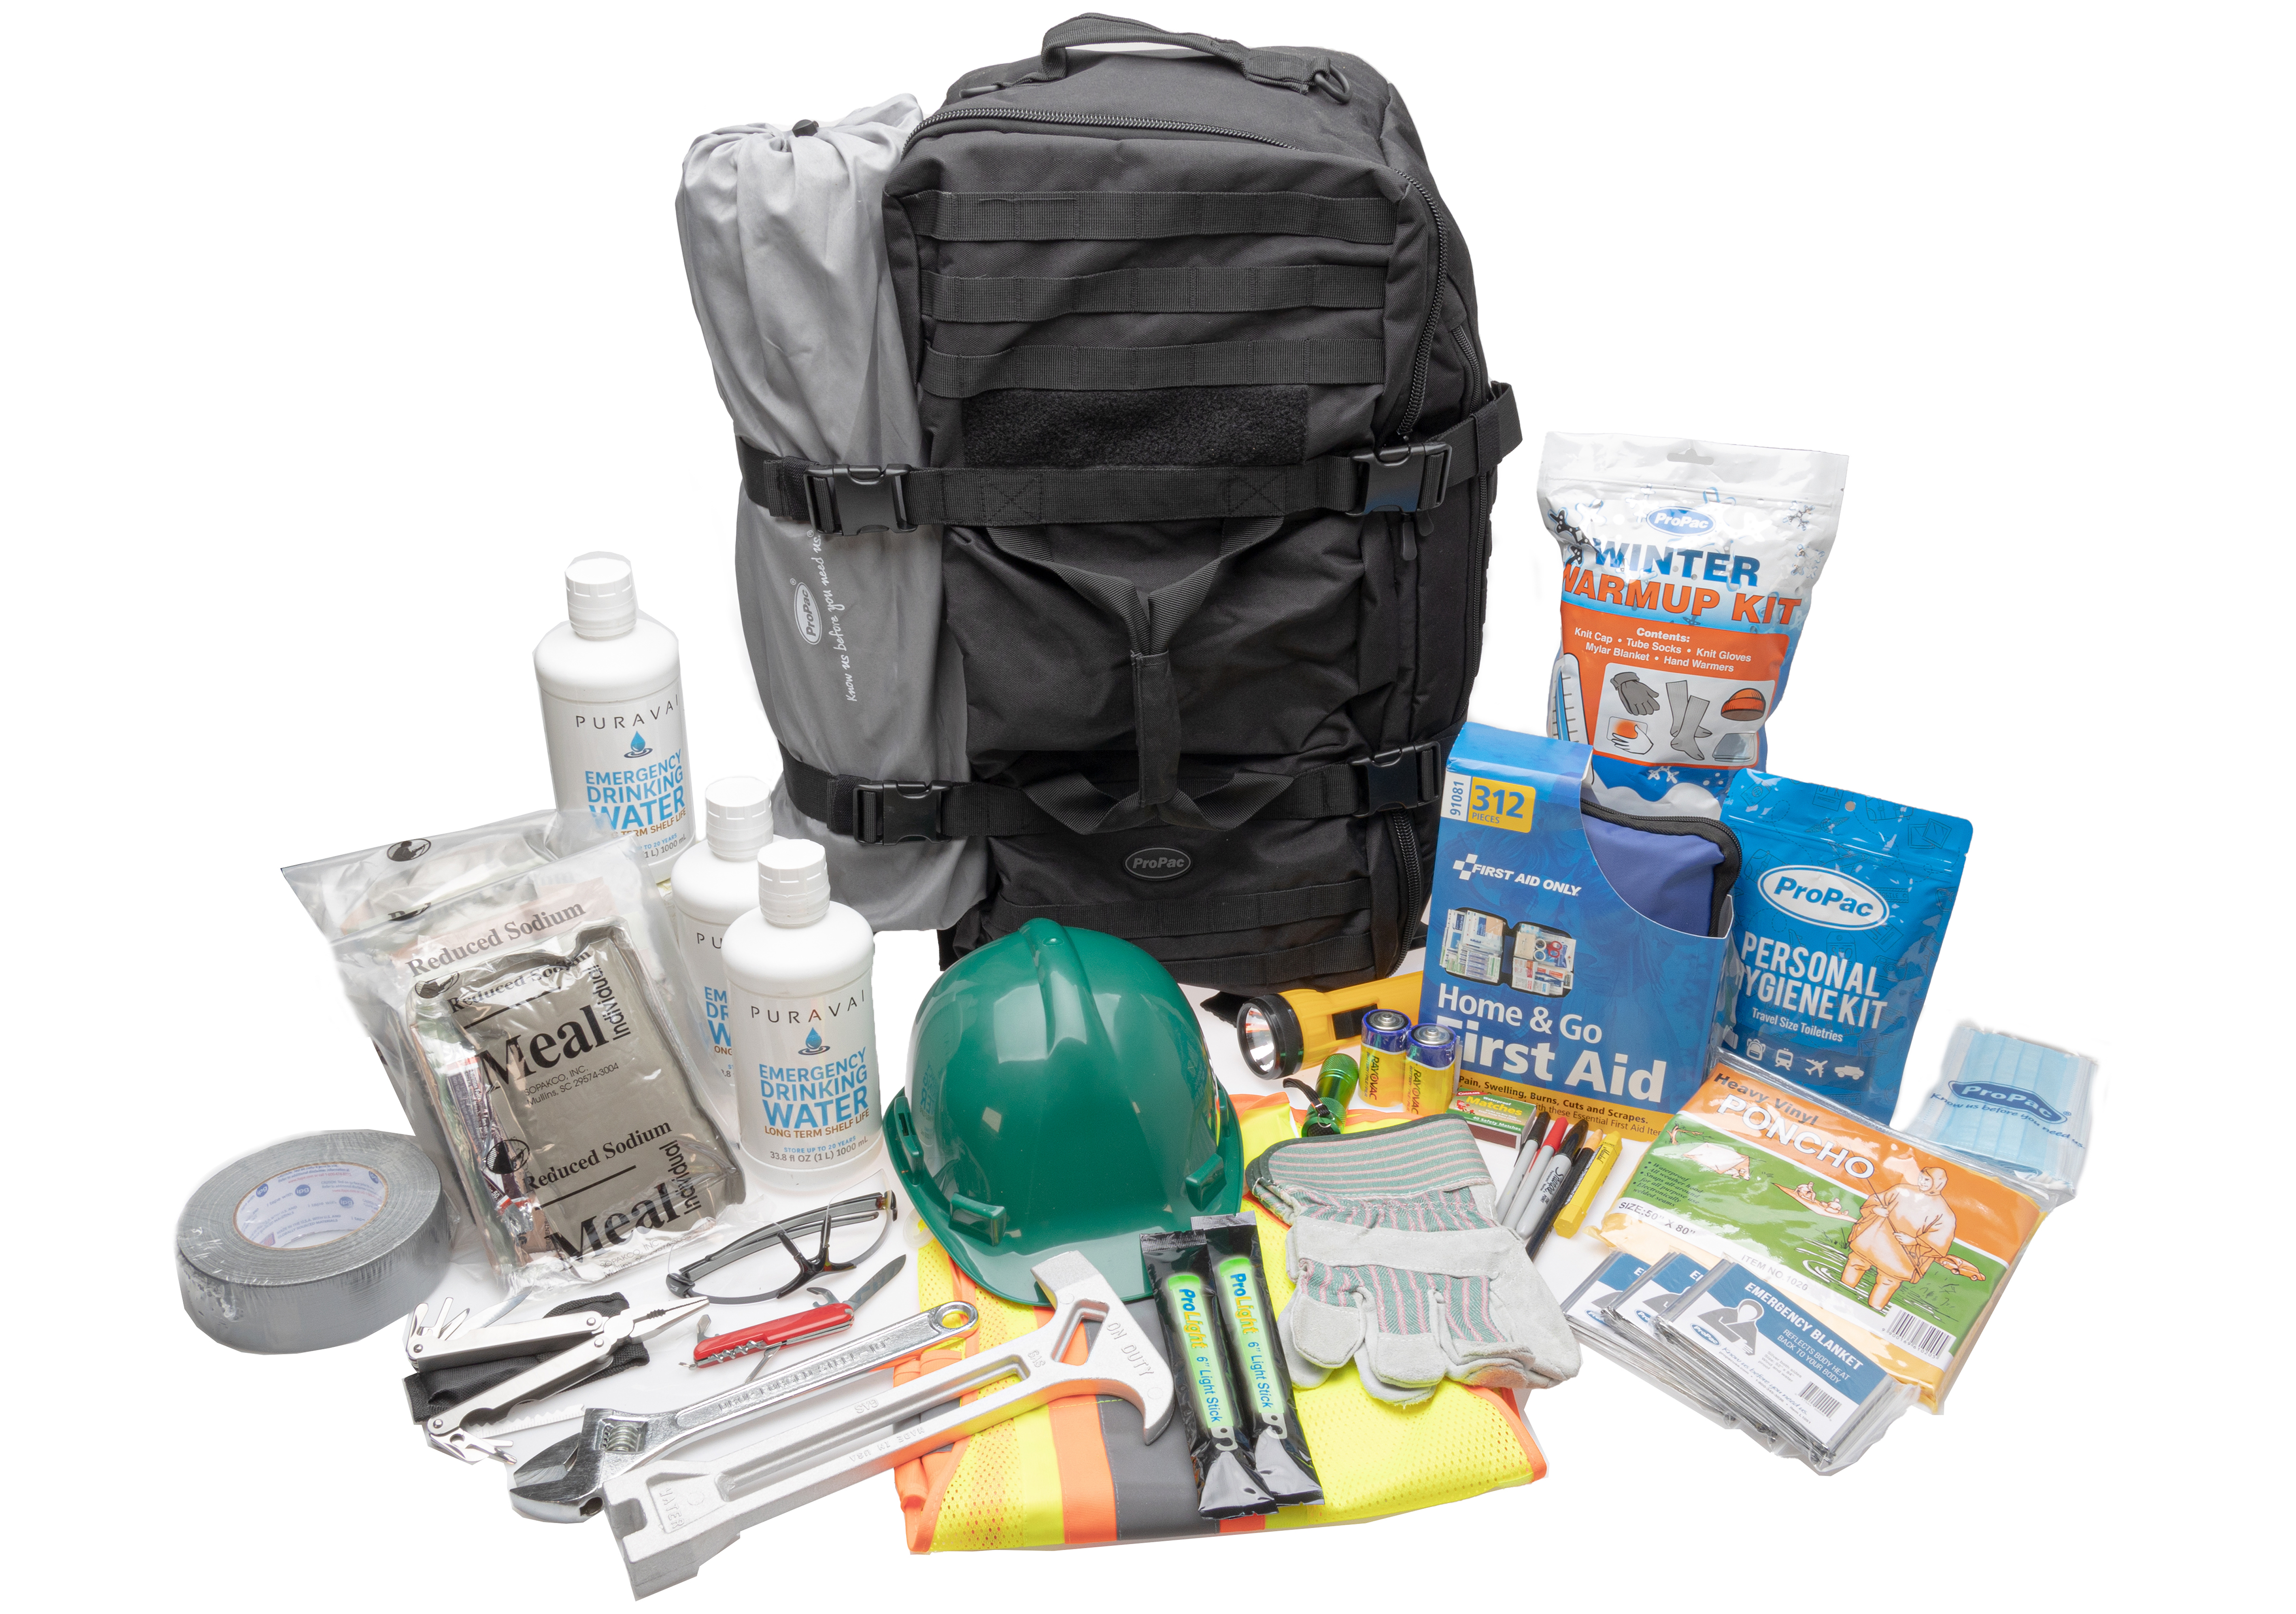 Everything You Need to Bug-Out: Emergency Go-Bag Kit